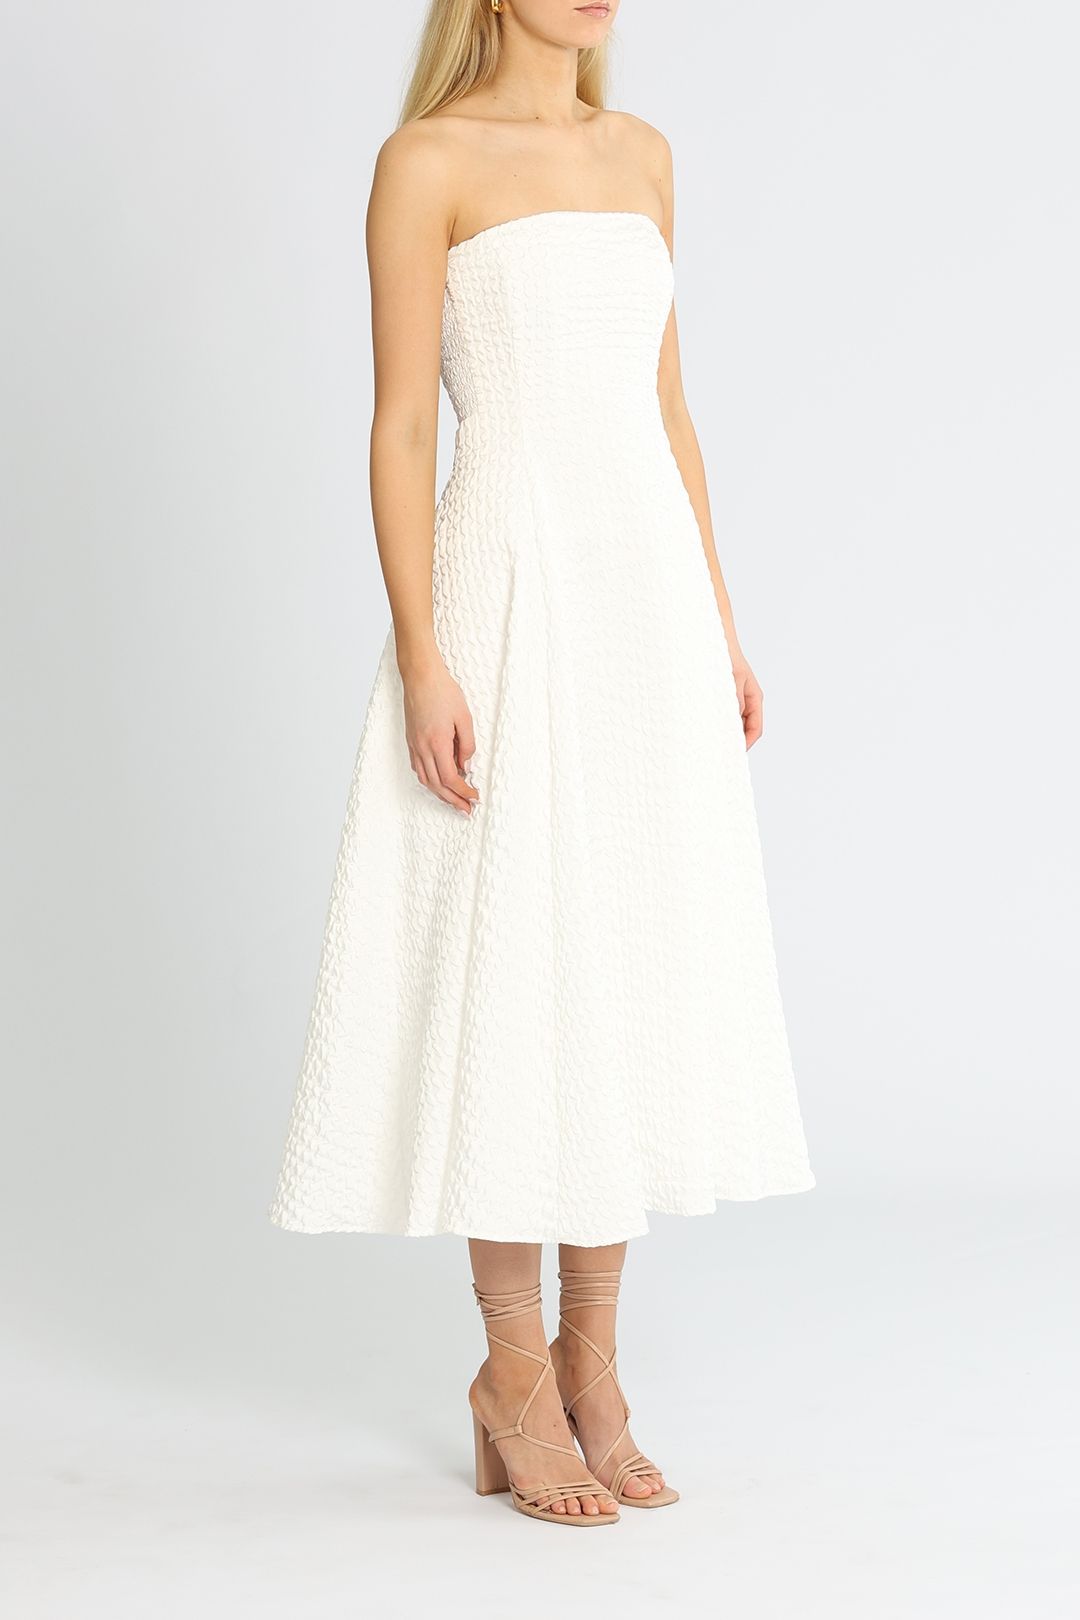 By Johnny Carrie Strapless Dress white